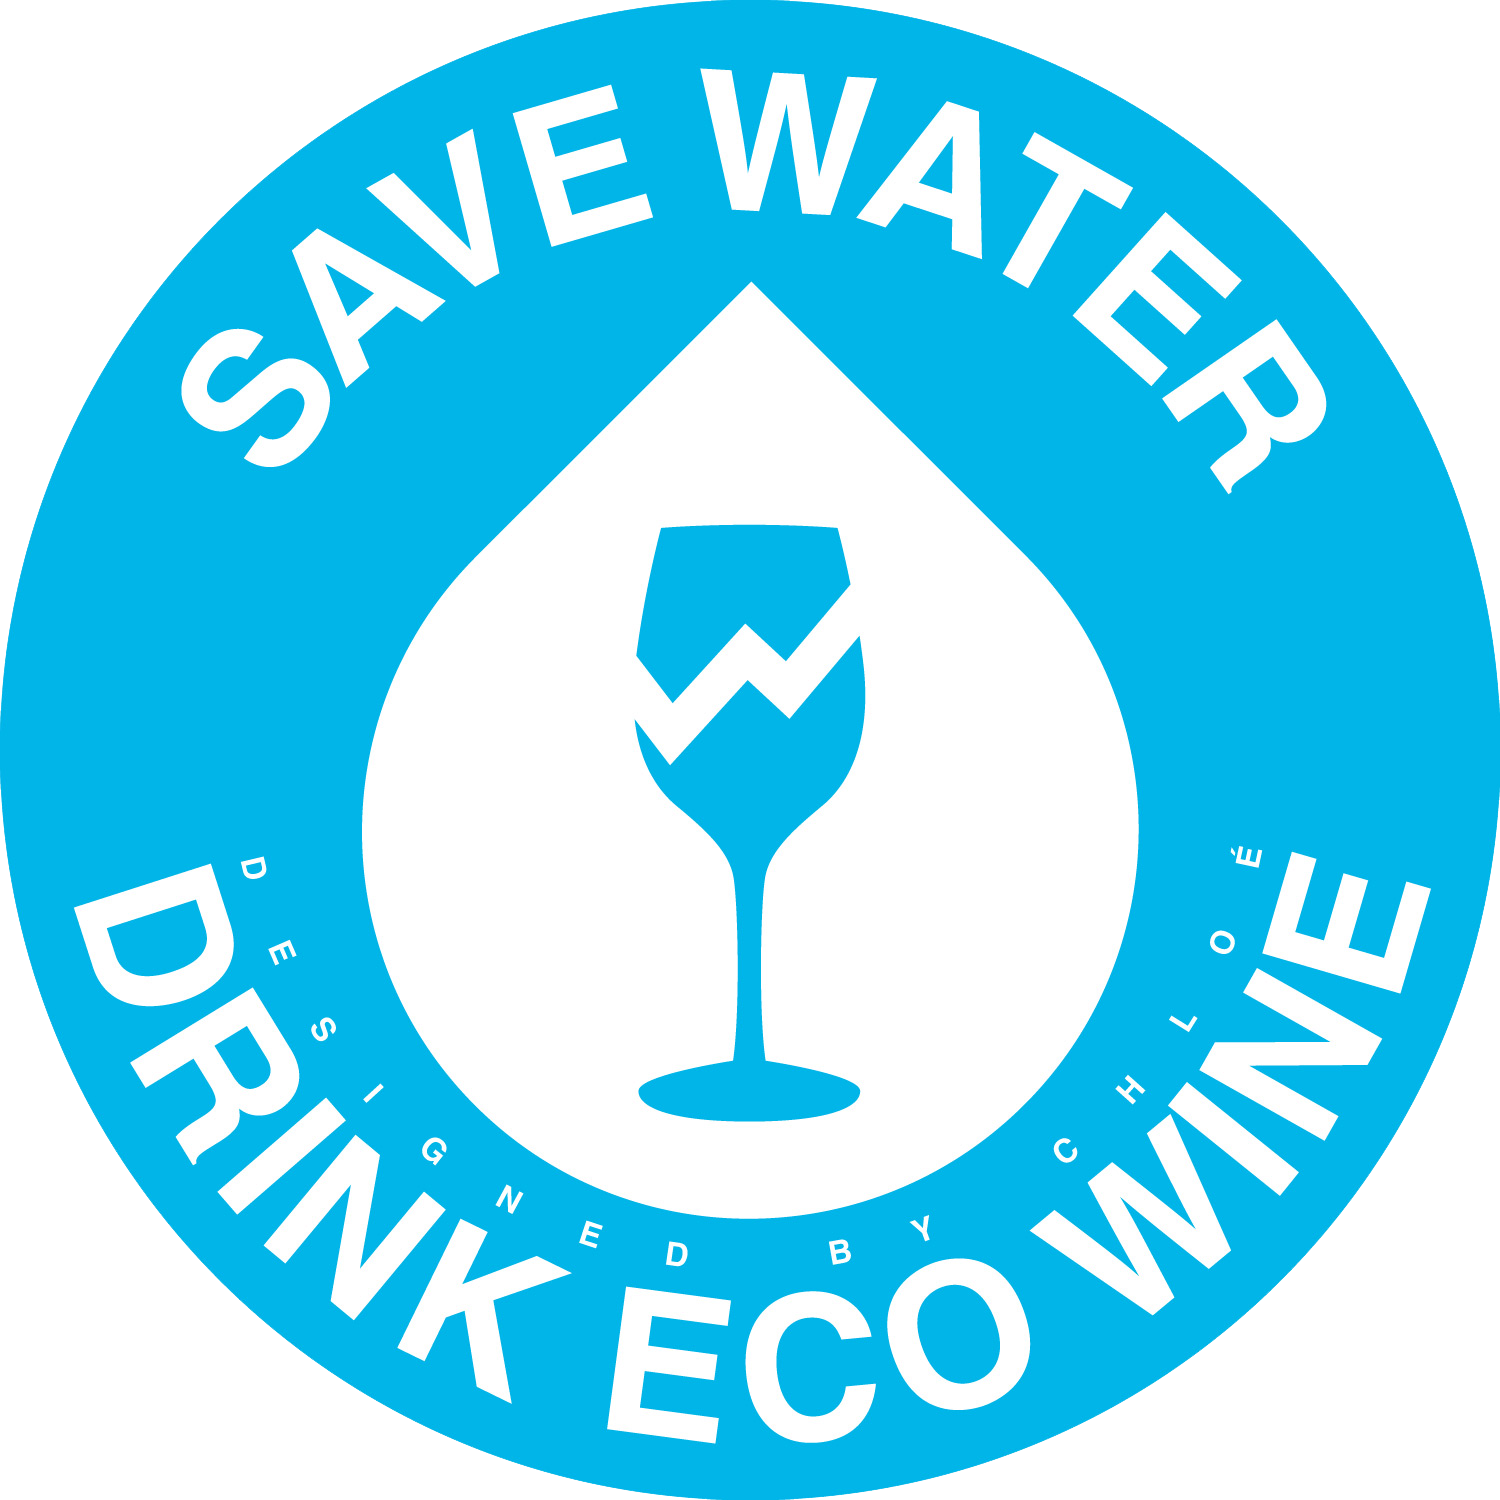 Explore Save Water Slogans, Eco Friendly, And More - Decatur Brew Works (1500x1500)